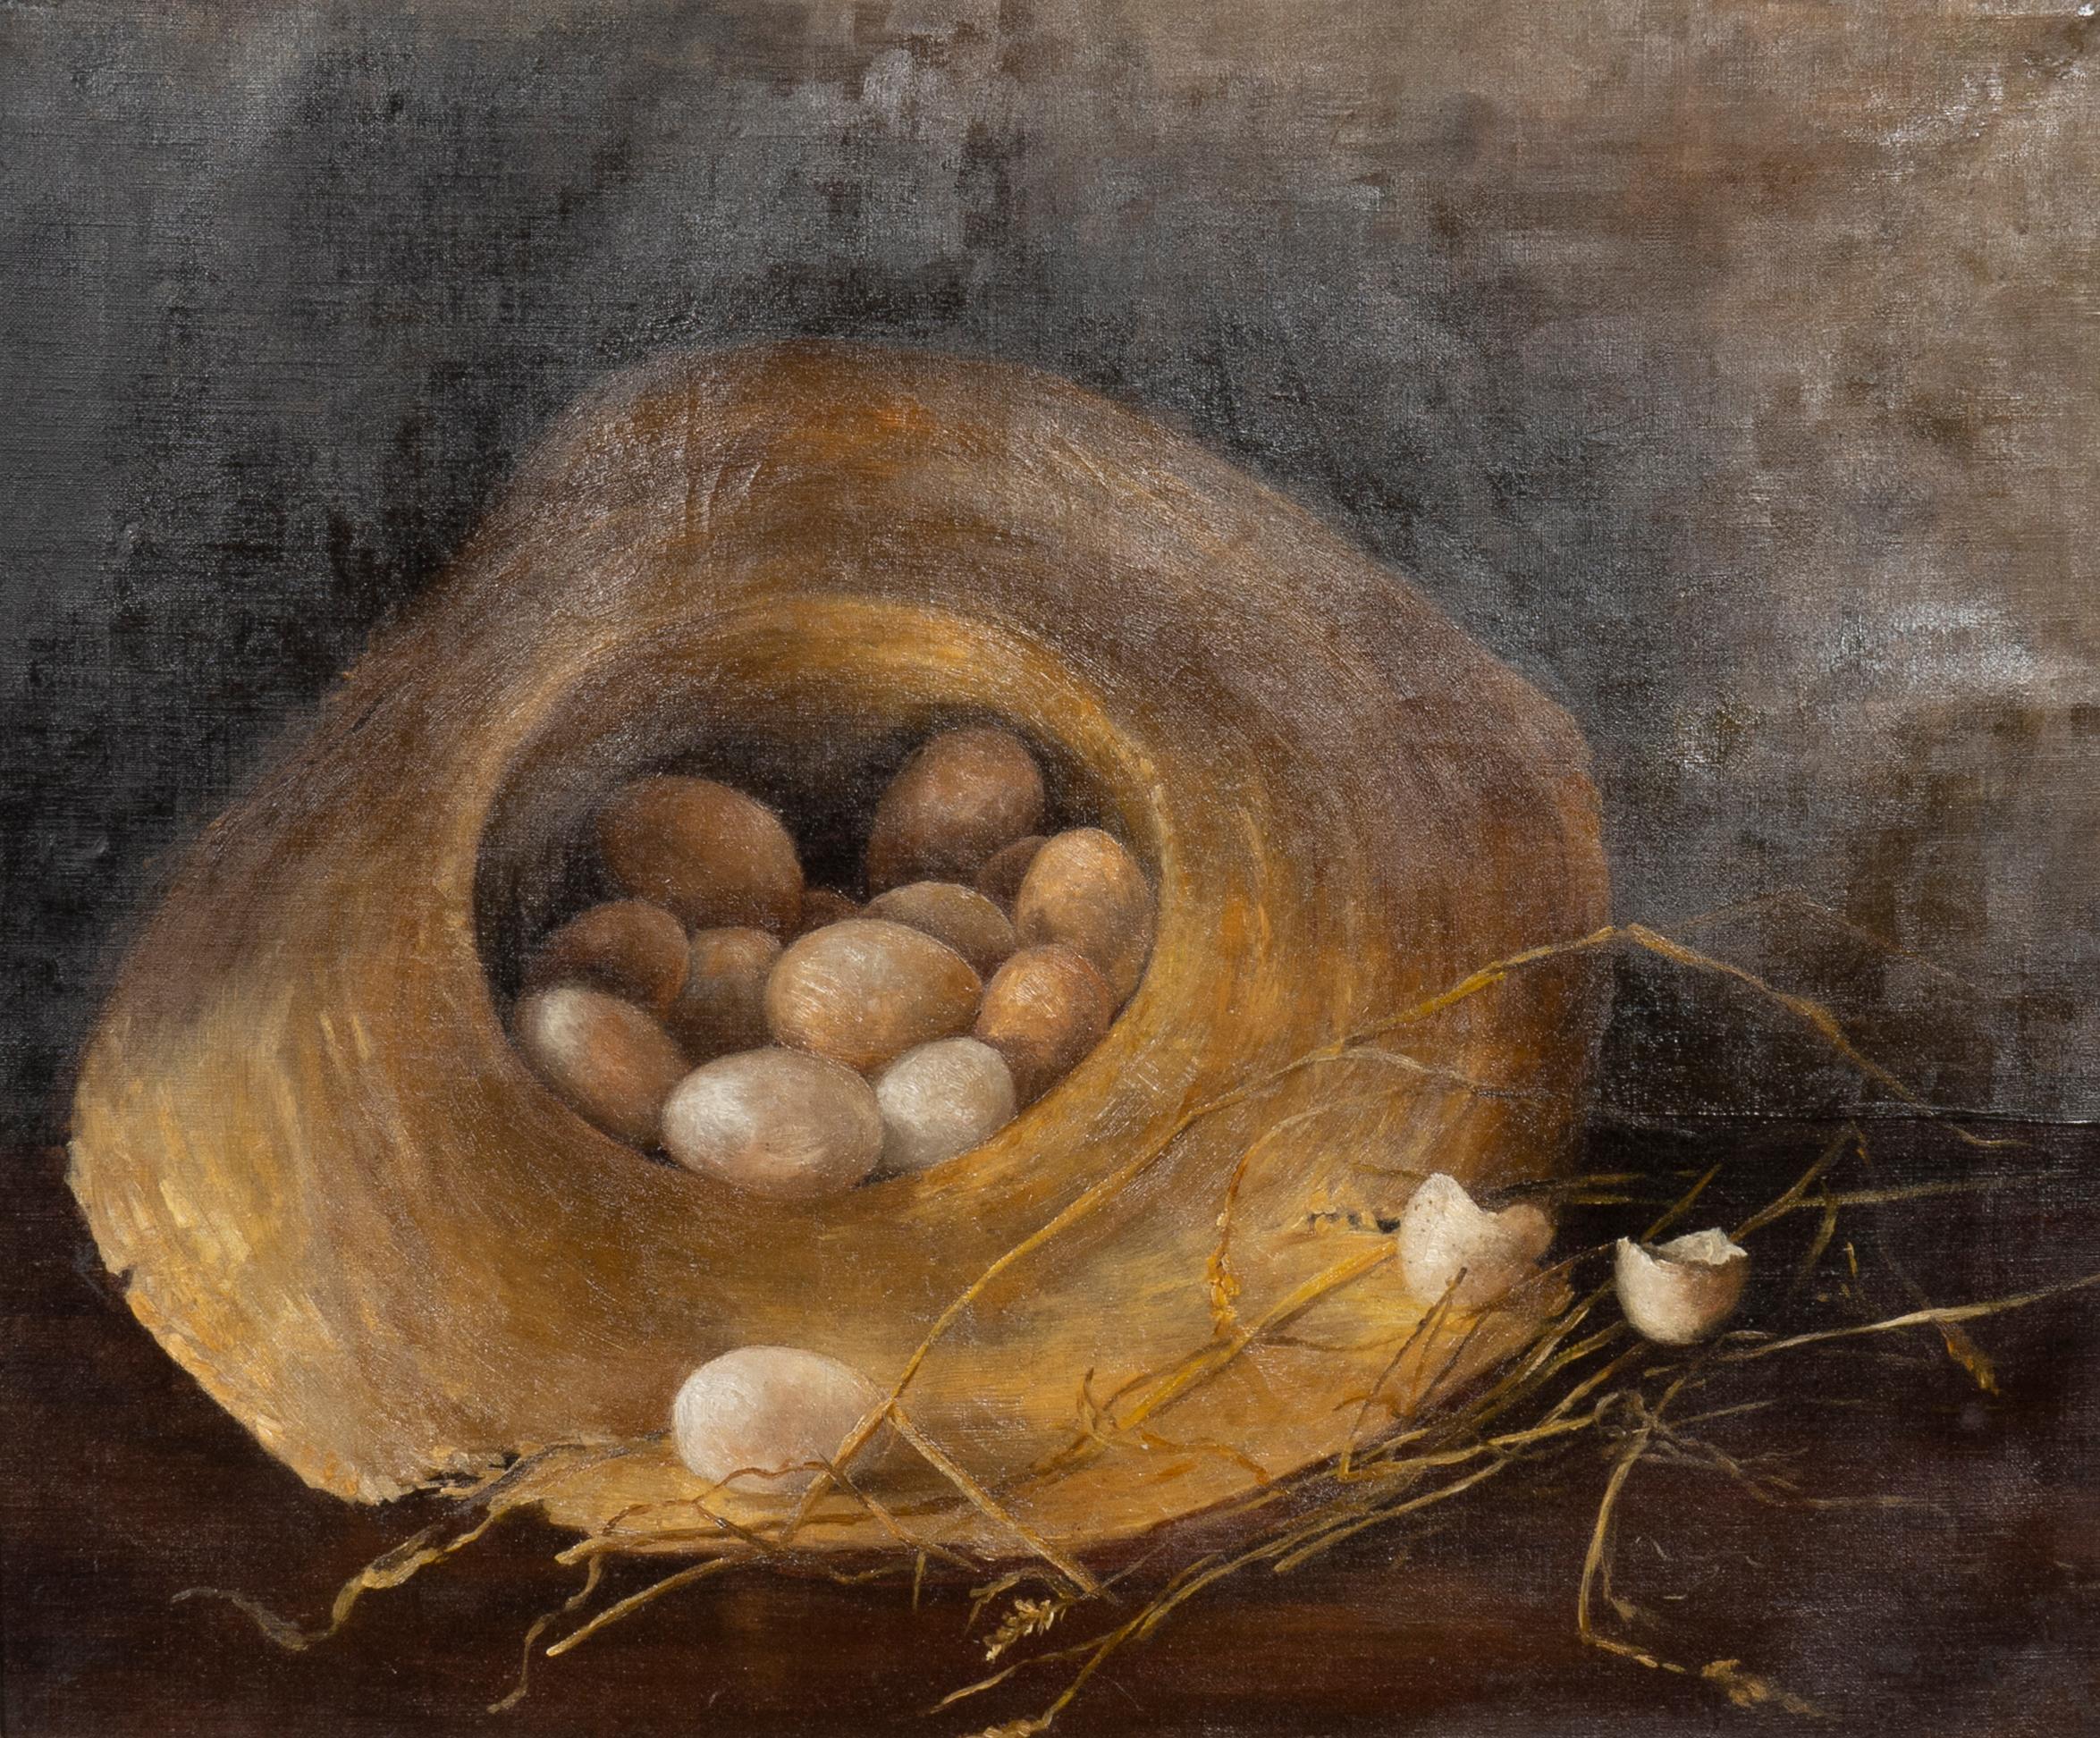 Charming painting of eggs in a straw hat. Nicely carved bleached pine frame.